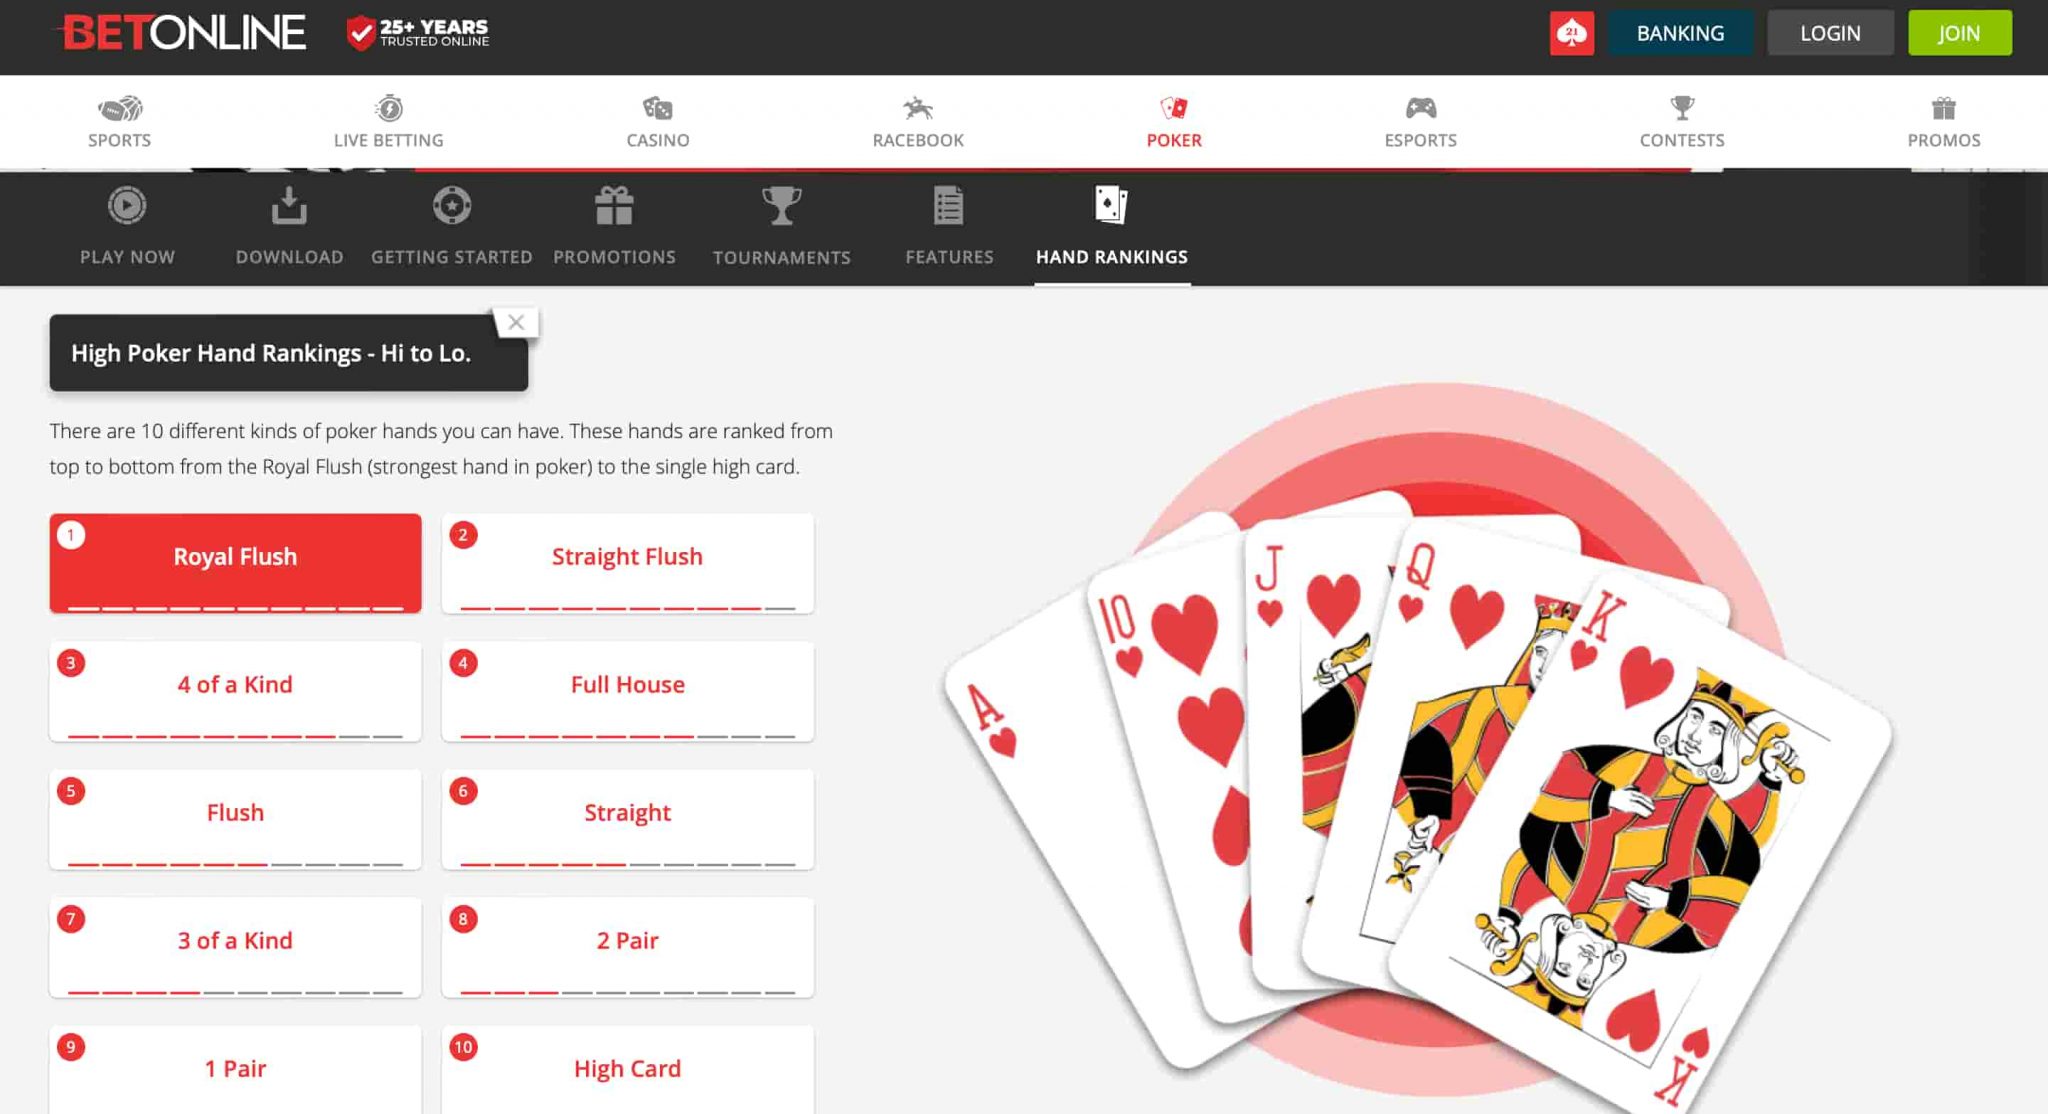 Maryland Online Poker – Compare The Best Real Money Poker Sites In MD